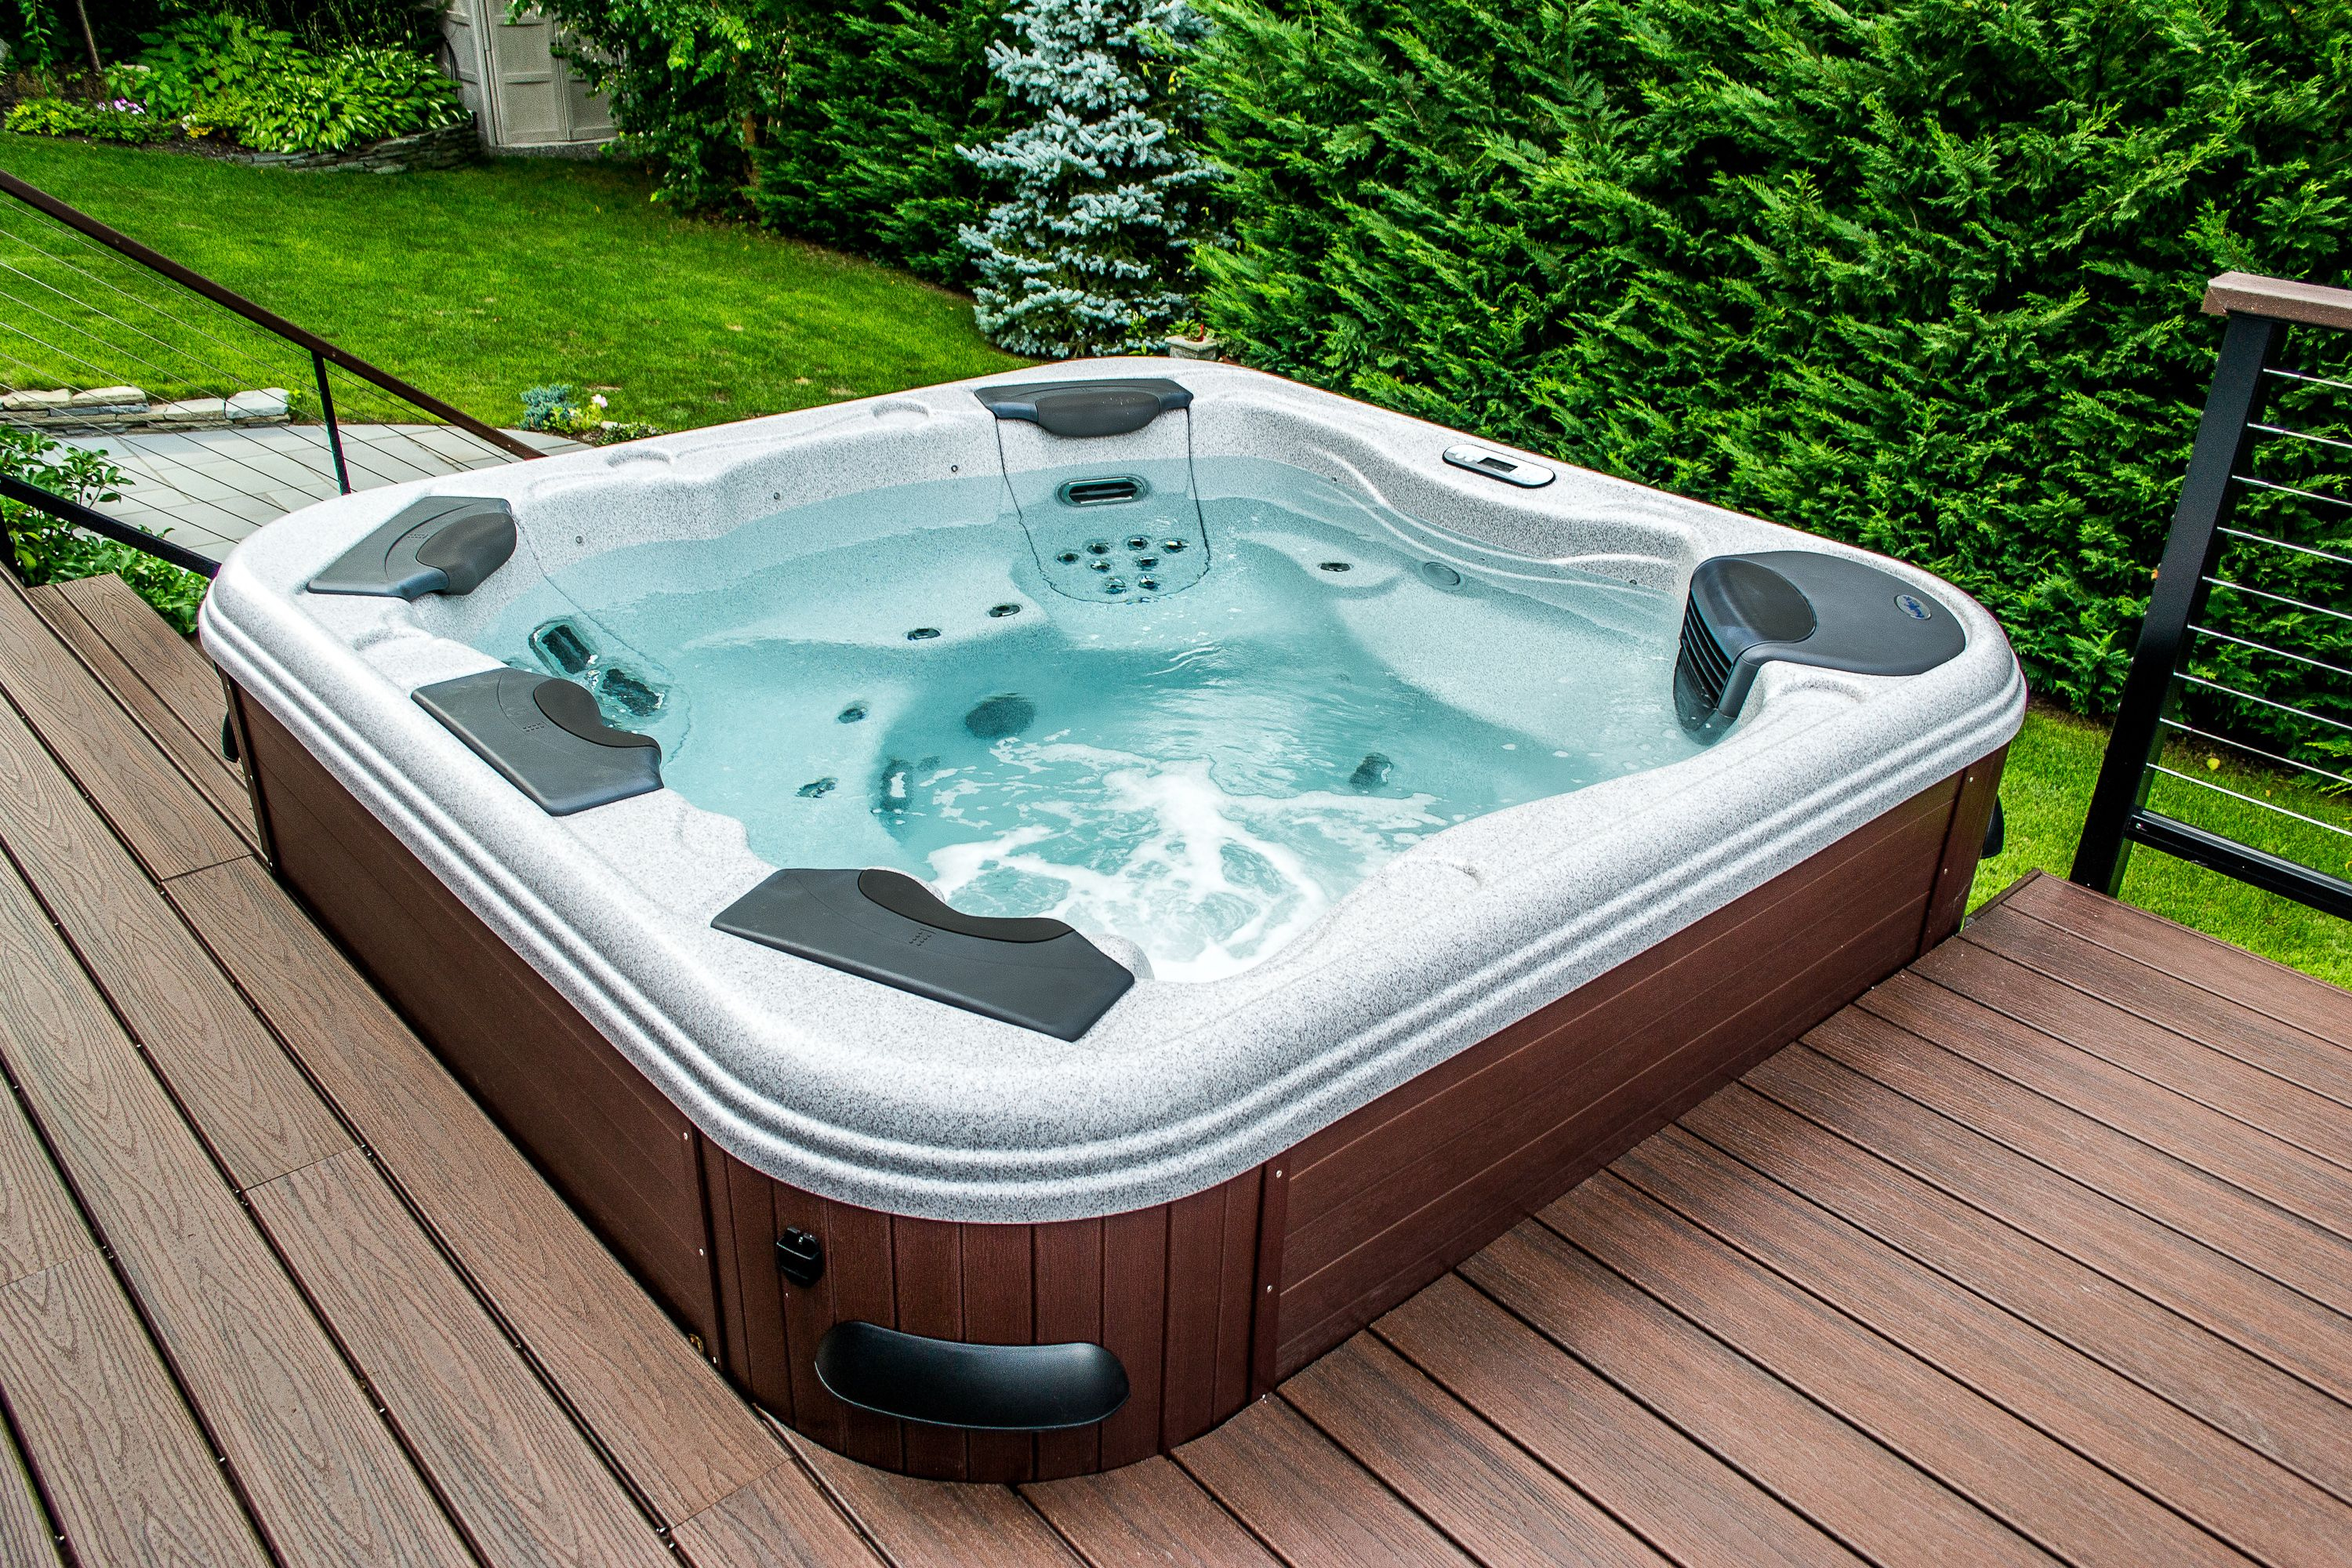 Bullfrog Spas 462 Hot Tubs And Trex Decking Bullfrog Spas And Hot intended for size 3000 X 2000